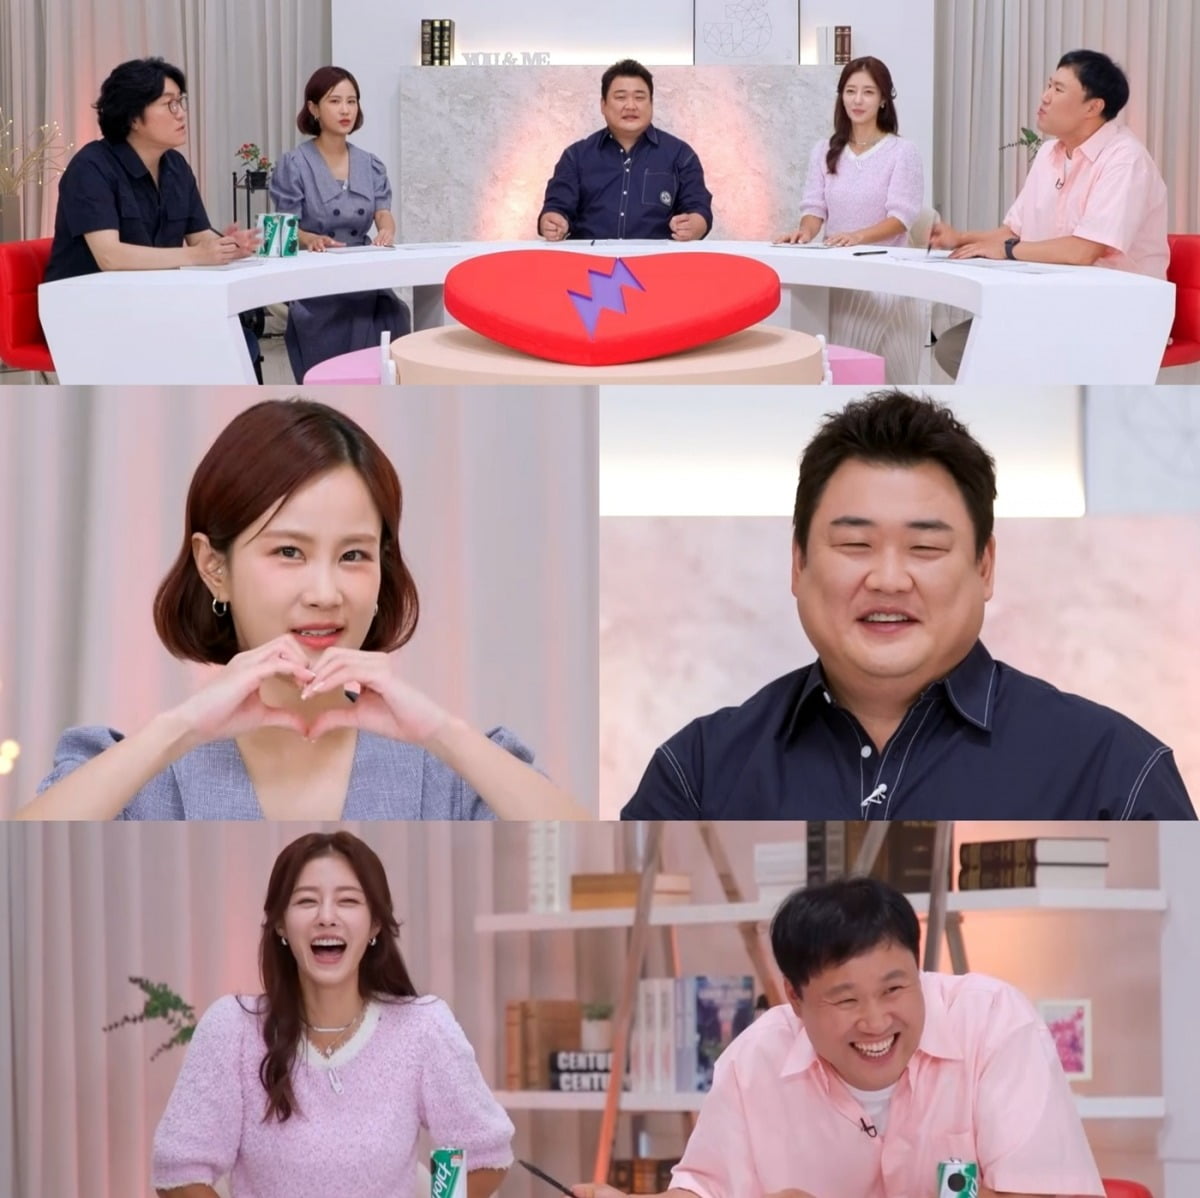 Comedian Kim Ji-min "You can seduce at least 3 men at a drinking party"